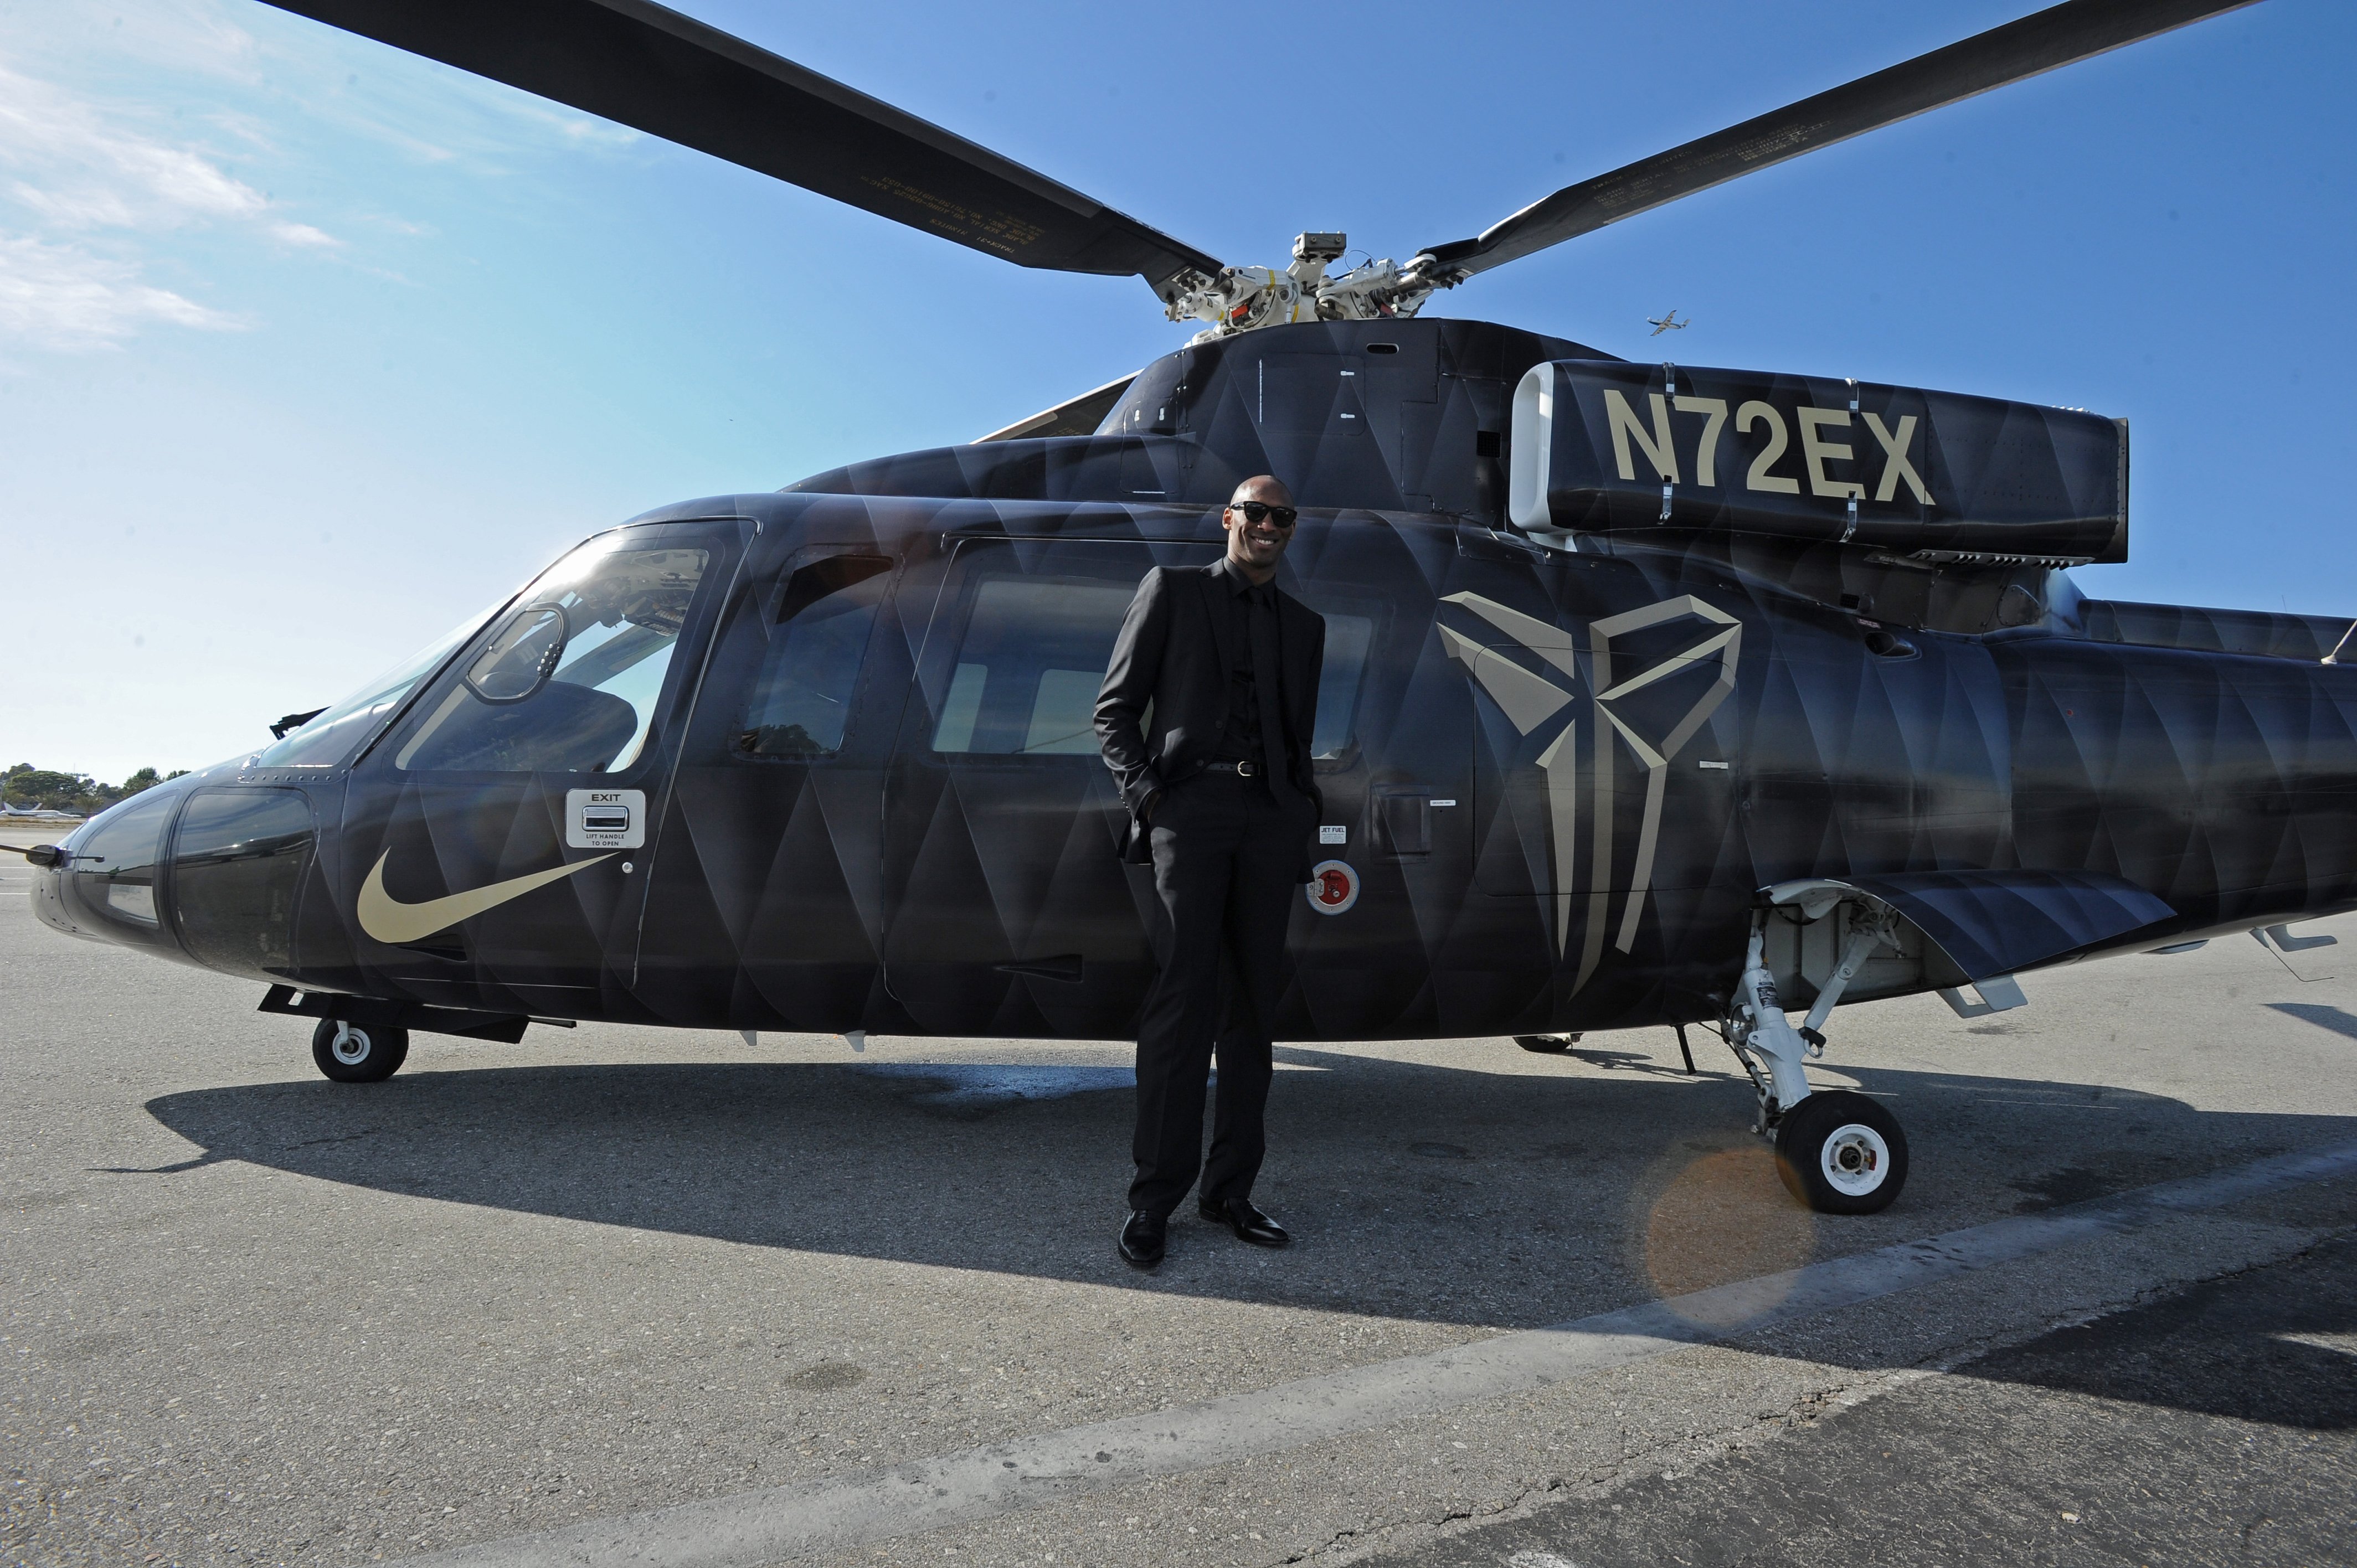 Kobe Bryant poses for a photo in front of the helicopter on April 13, 2016, at Staples Center in Los Angeles, California. | Source: Getty Images.